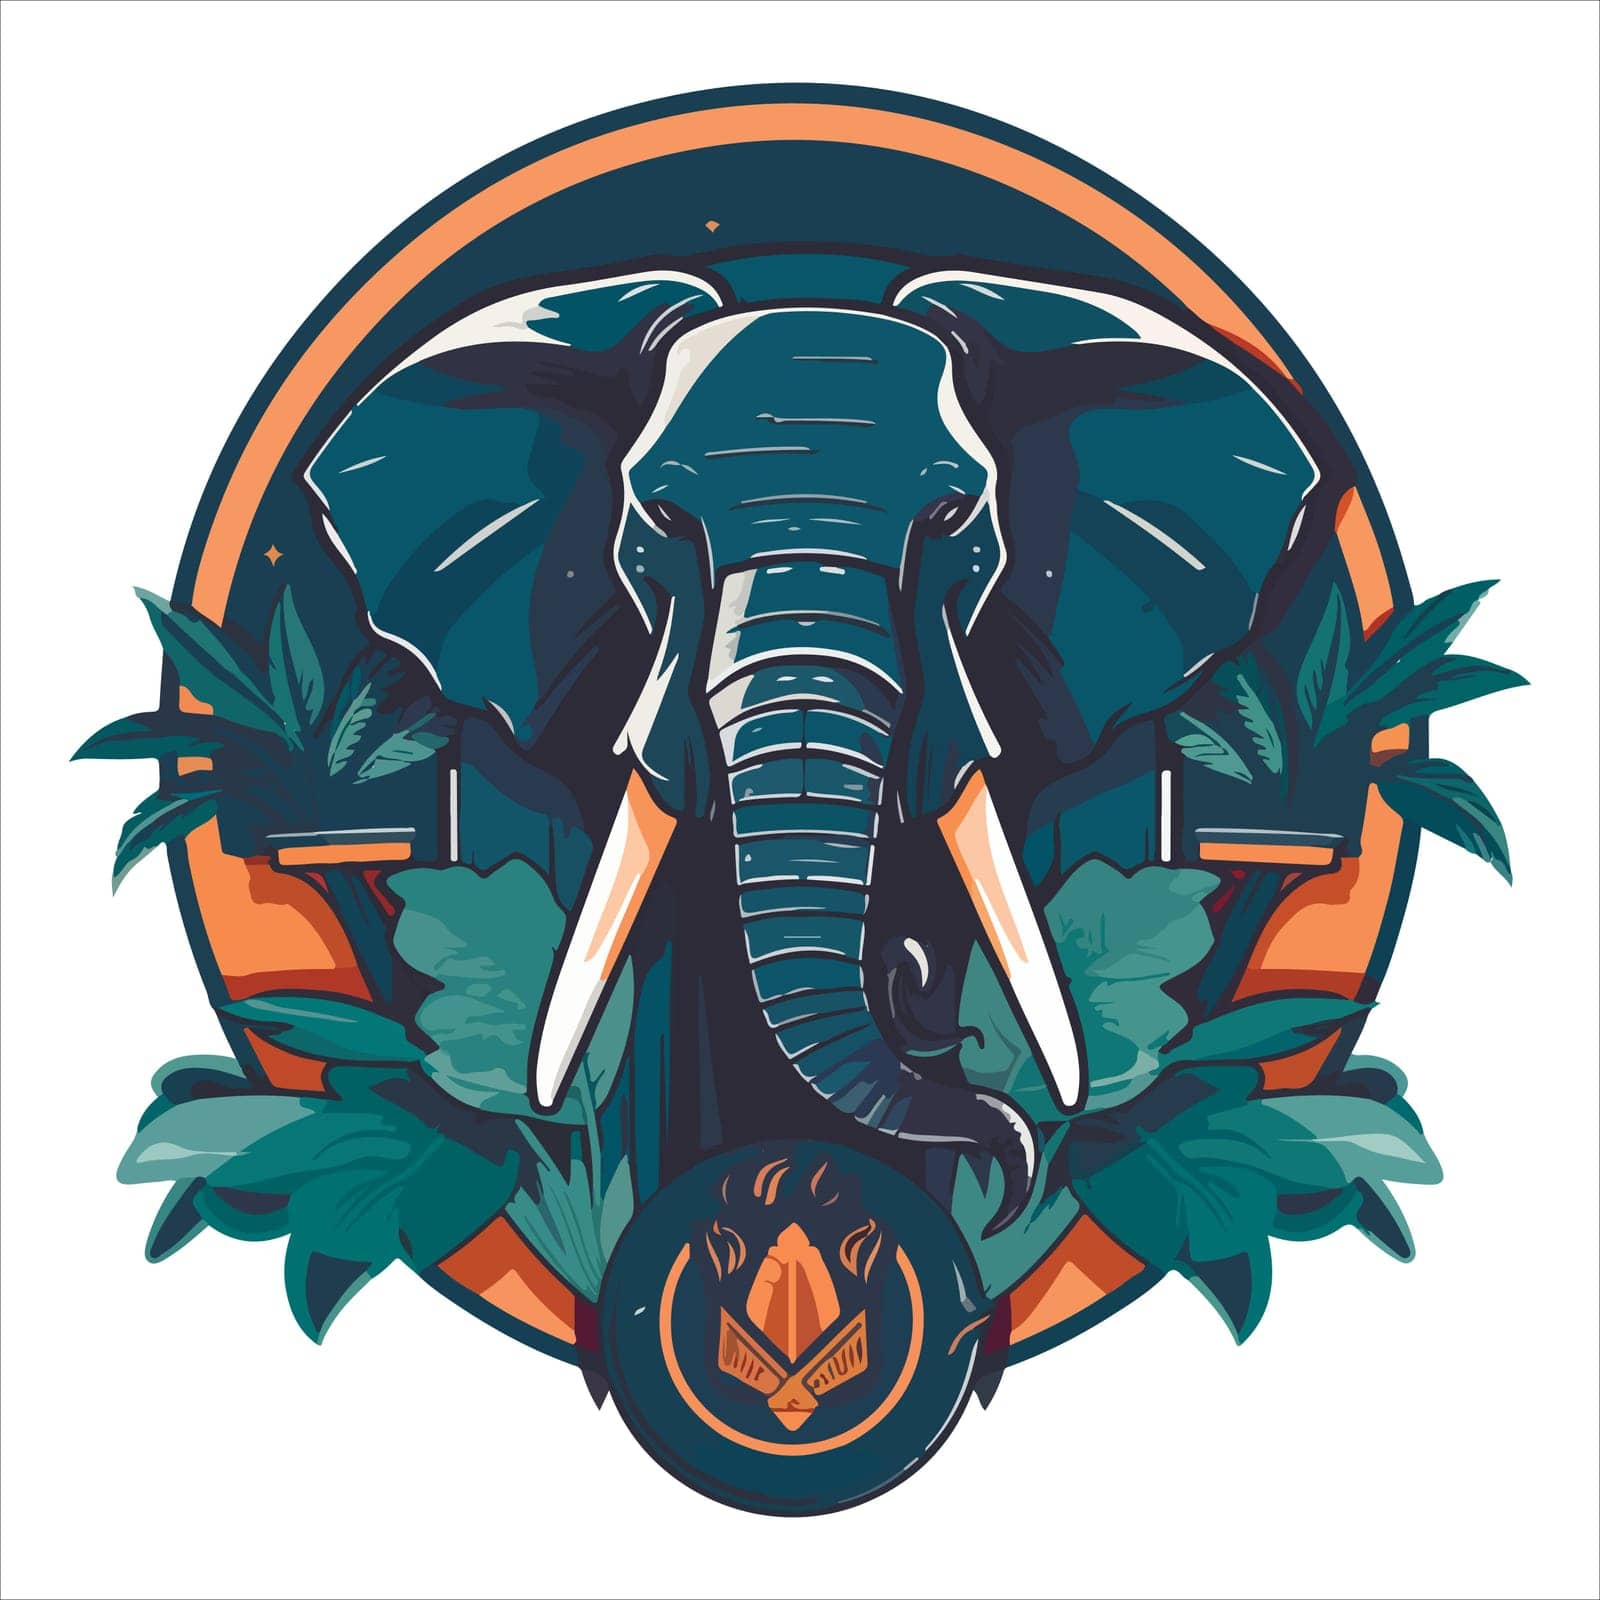 elephant mascot logo design vector with modern illustration concept style for badge, emblem and tshirt printing. angry elephant illustration with feet up by sergeykoshkin